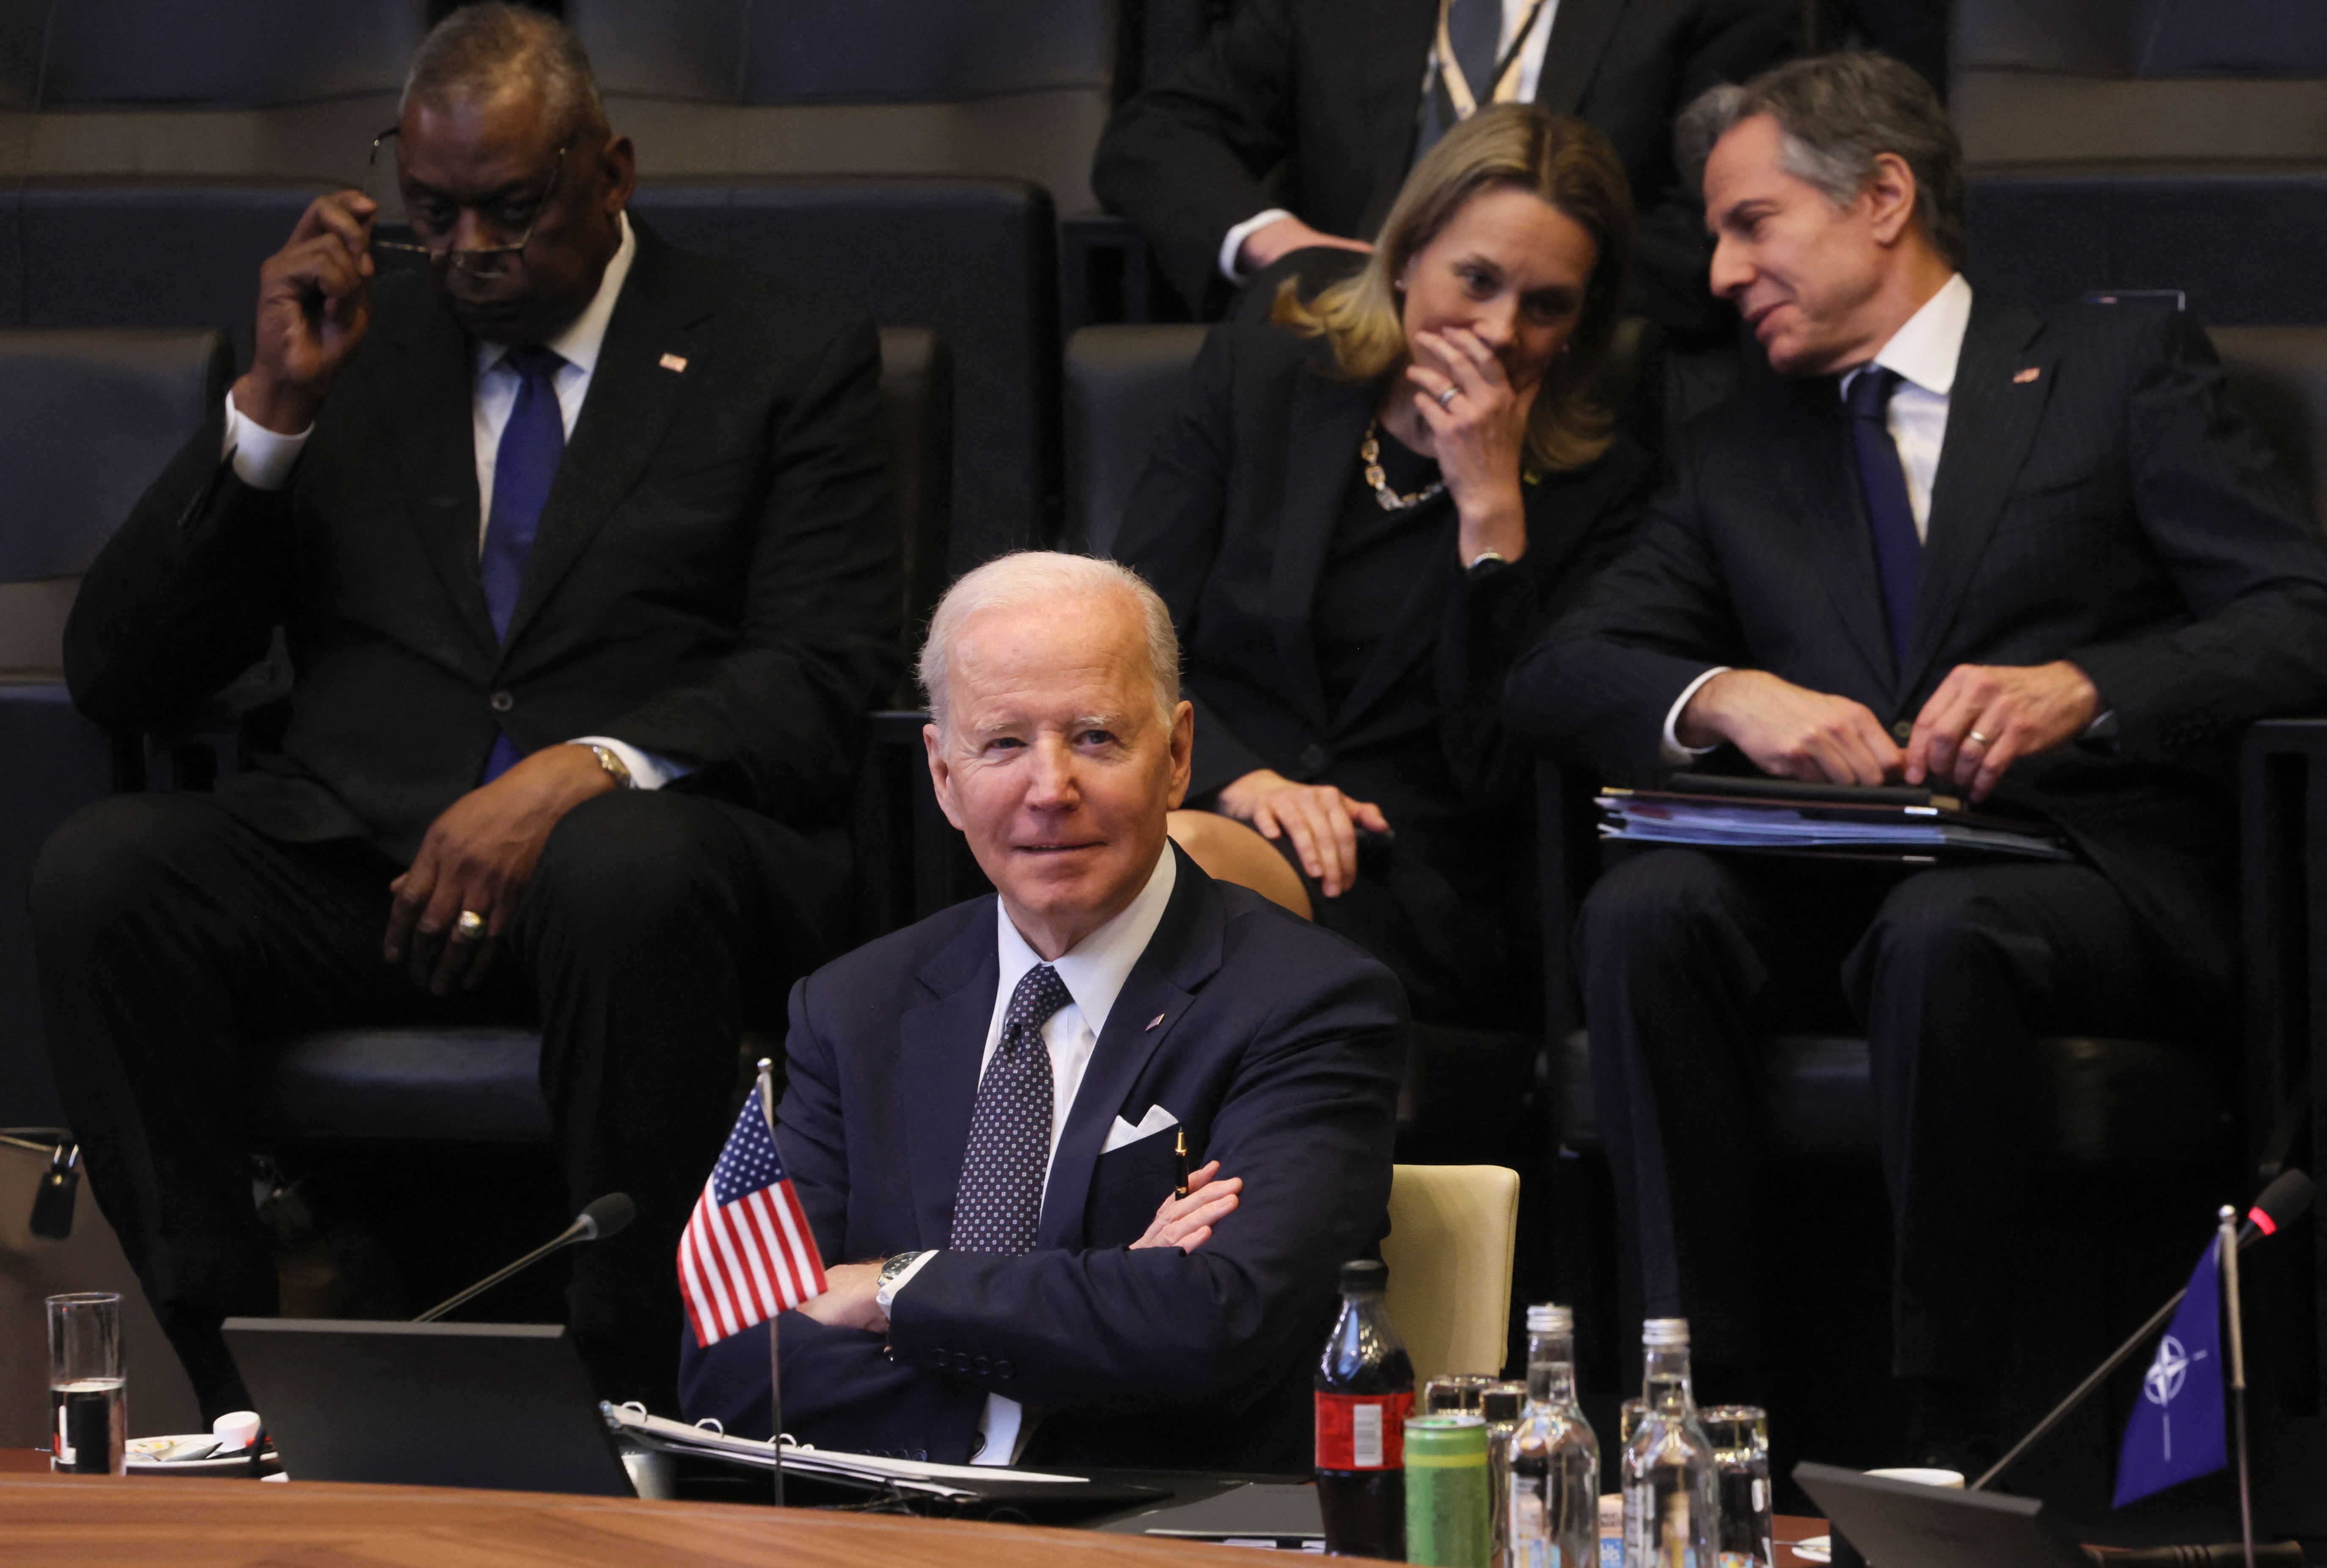 U.S. President Joe Biden attends a North Atlantic Council meeting at NATO Headquarters in Brussels, Belgium, on March 24.